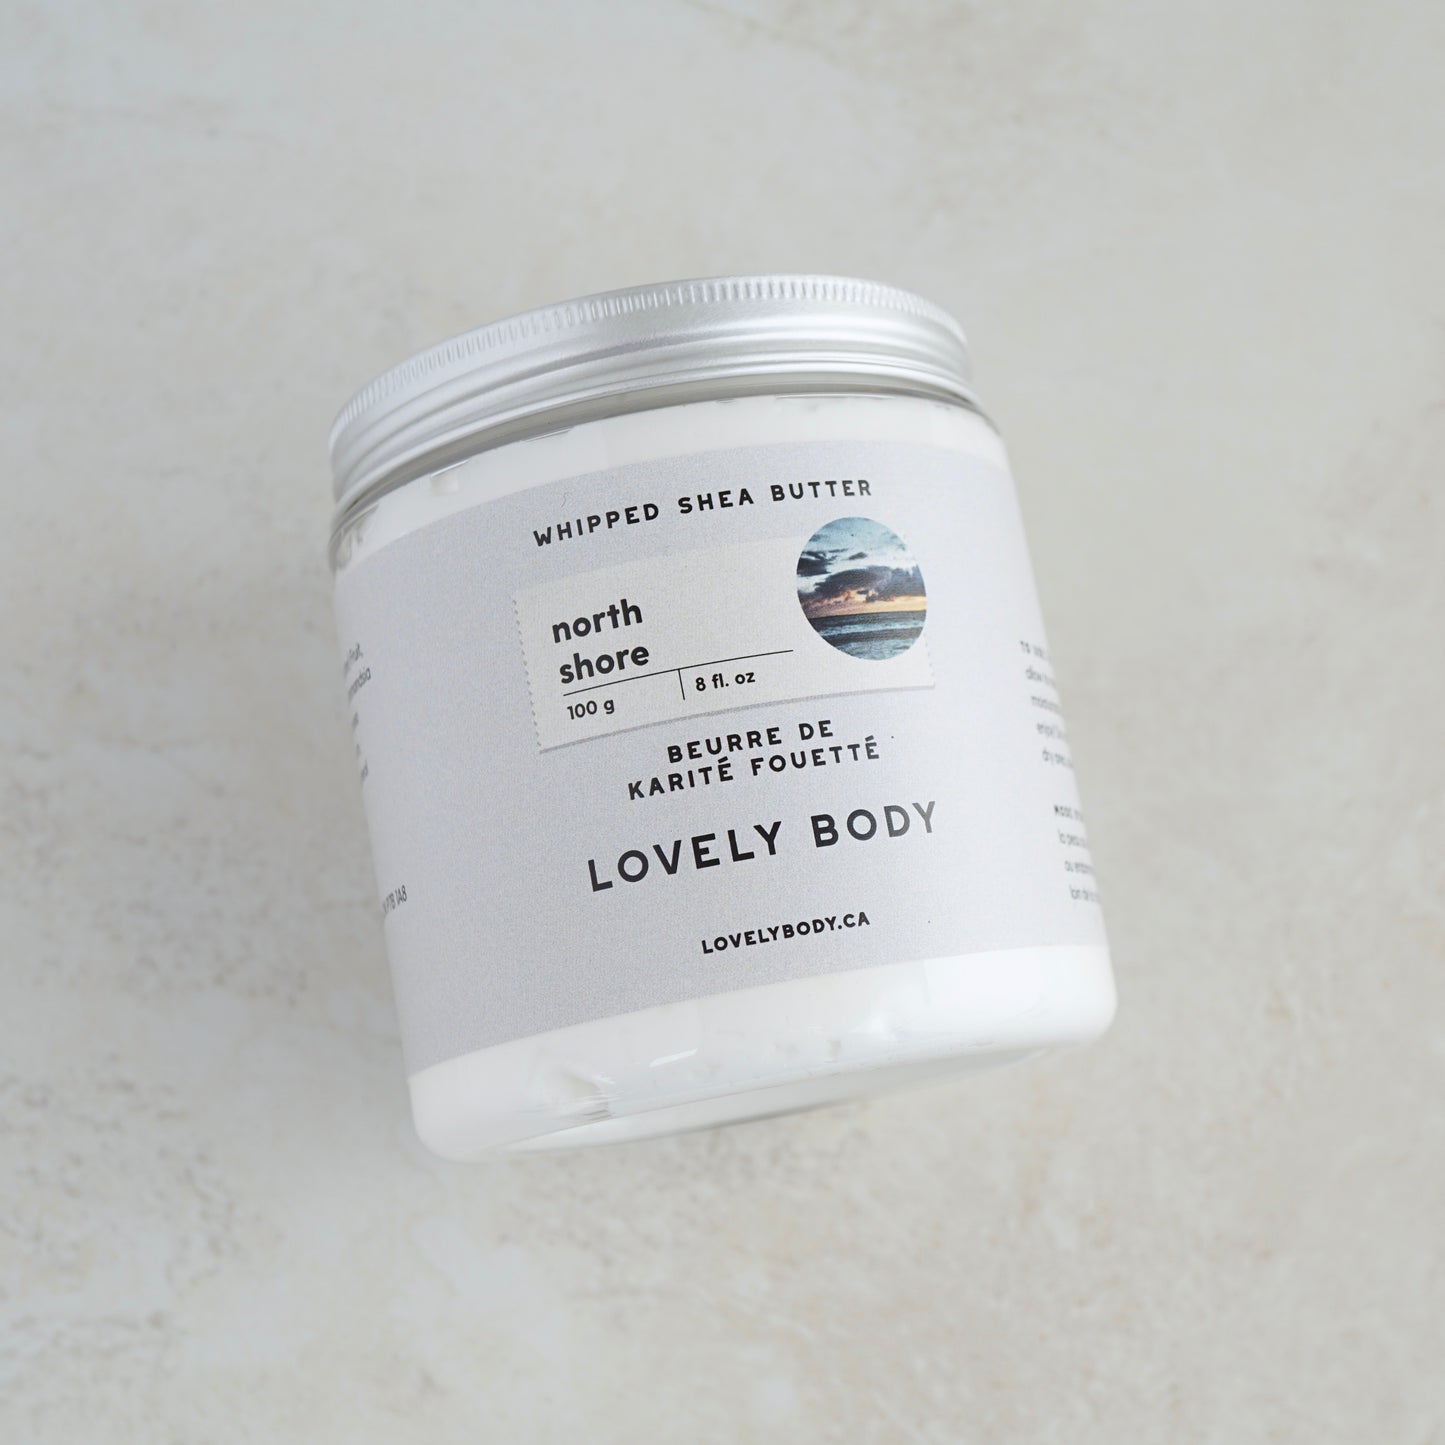 North Shore Whipped Shea Butter